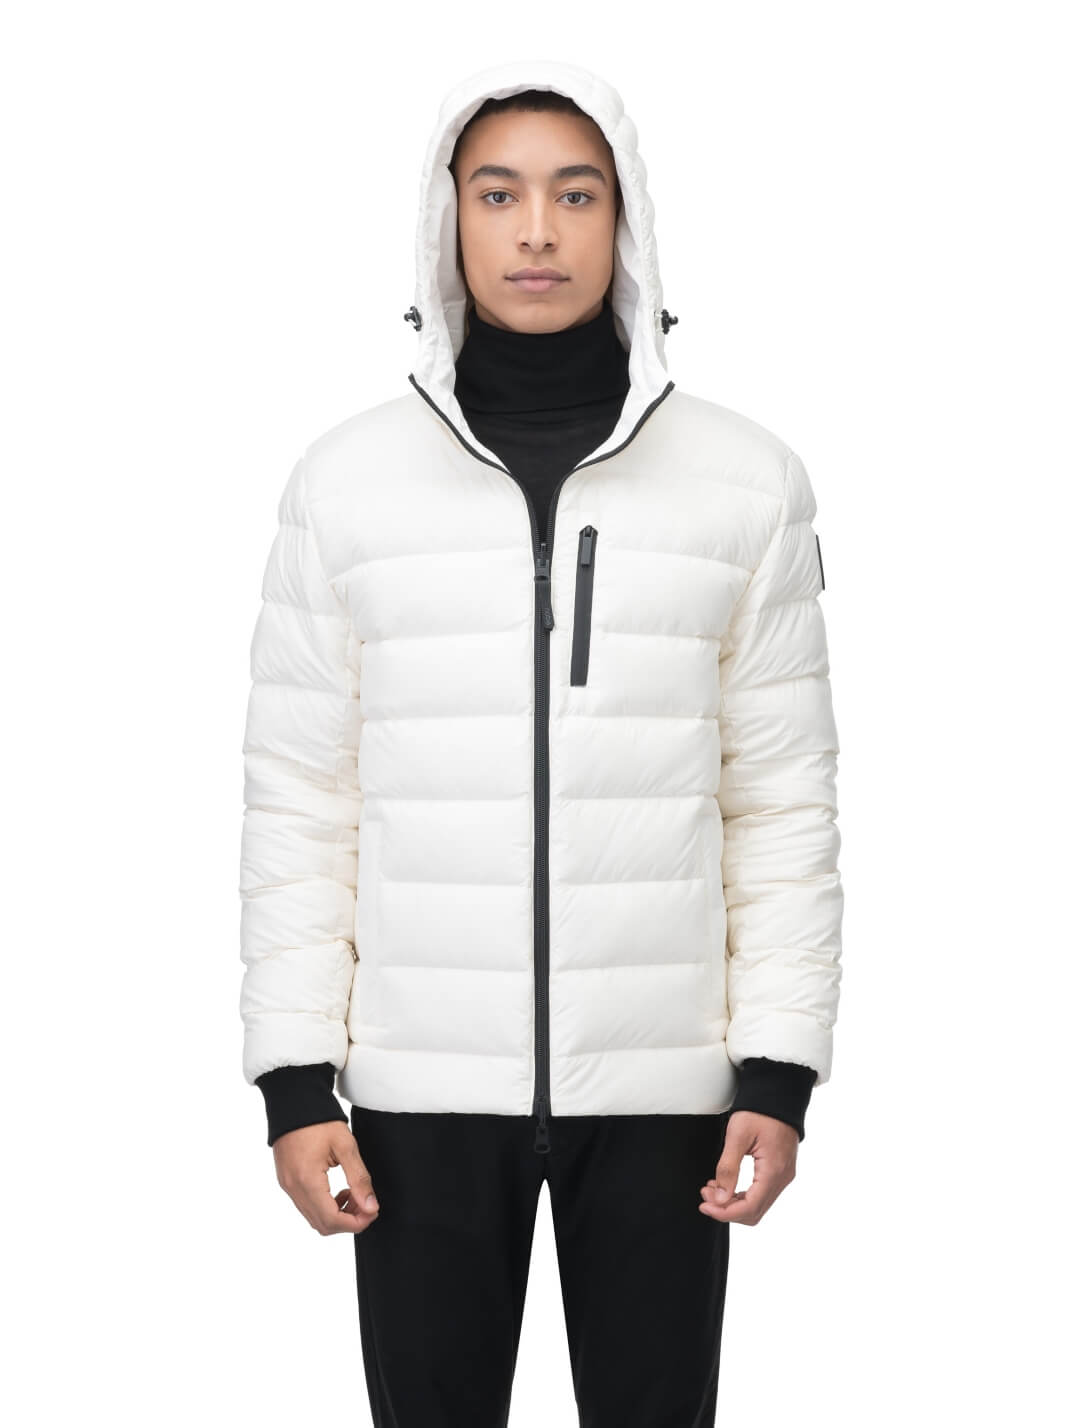 Chris Men's Mid Weight Reversible Puffer Jacket in hip length, Canadian duck down insulation, non-removable adjustable hood, ribbed cuffs, and quilted body on reversible side, in Chalk